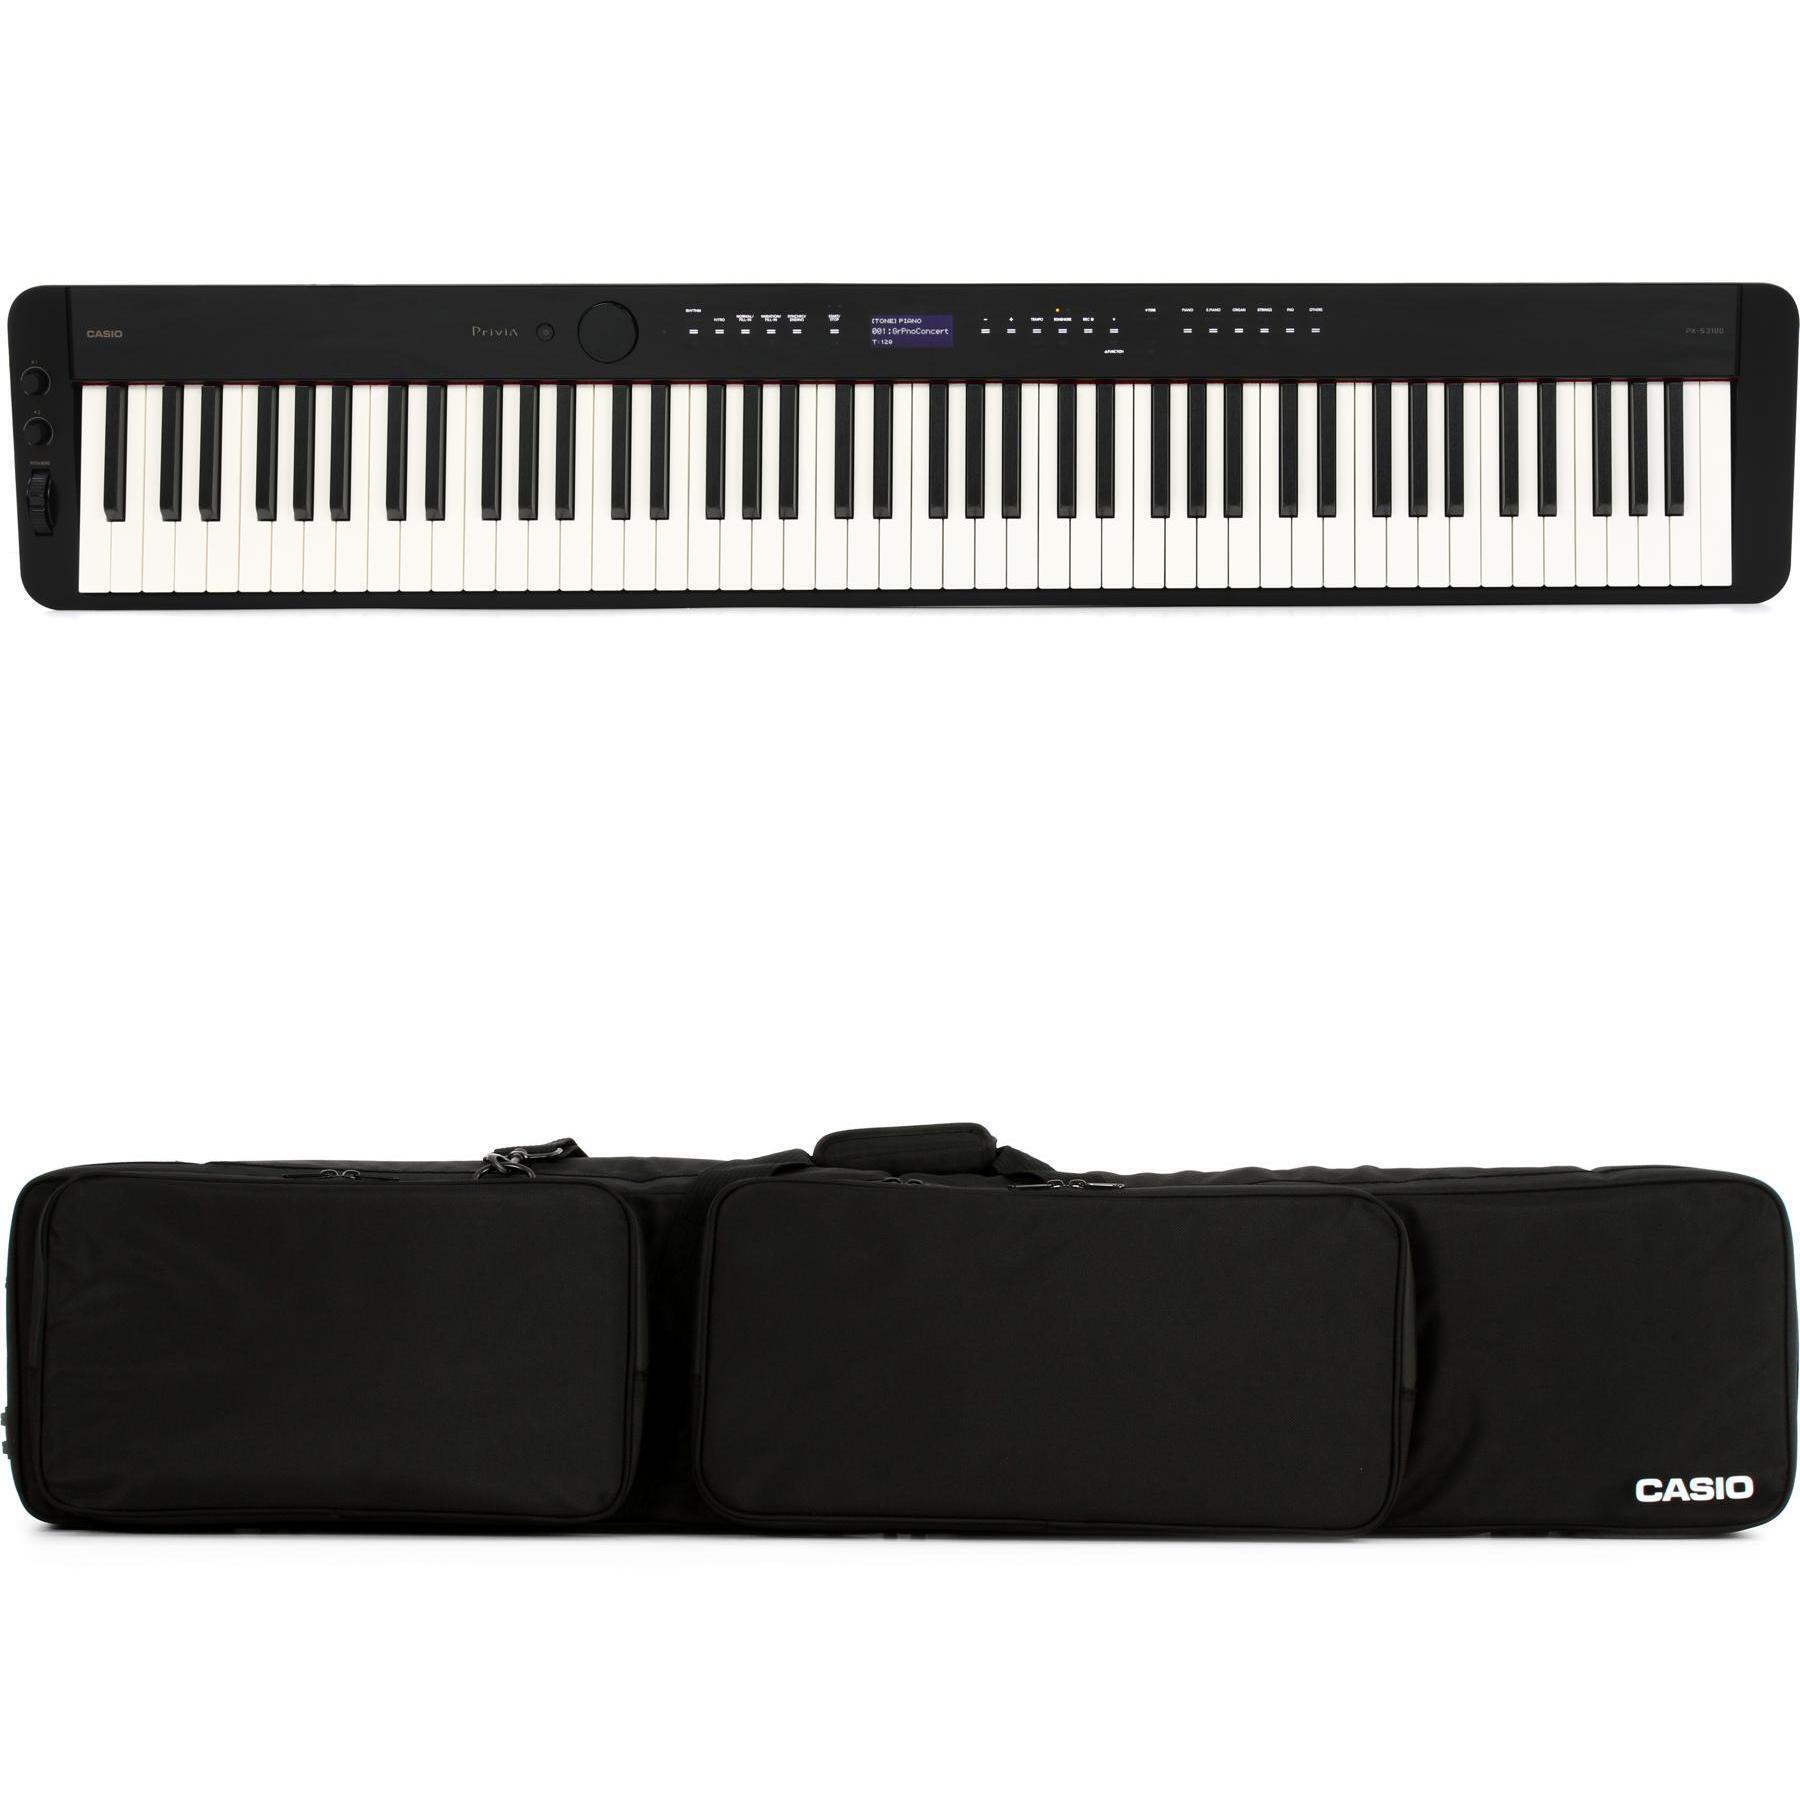 Casio Privia PX-S3100 88-key Digital Piano with Carry Case - Black